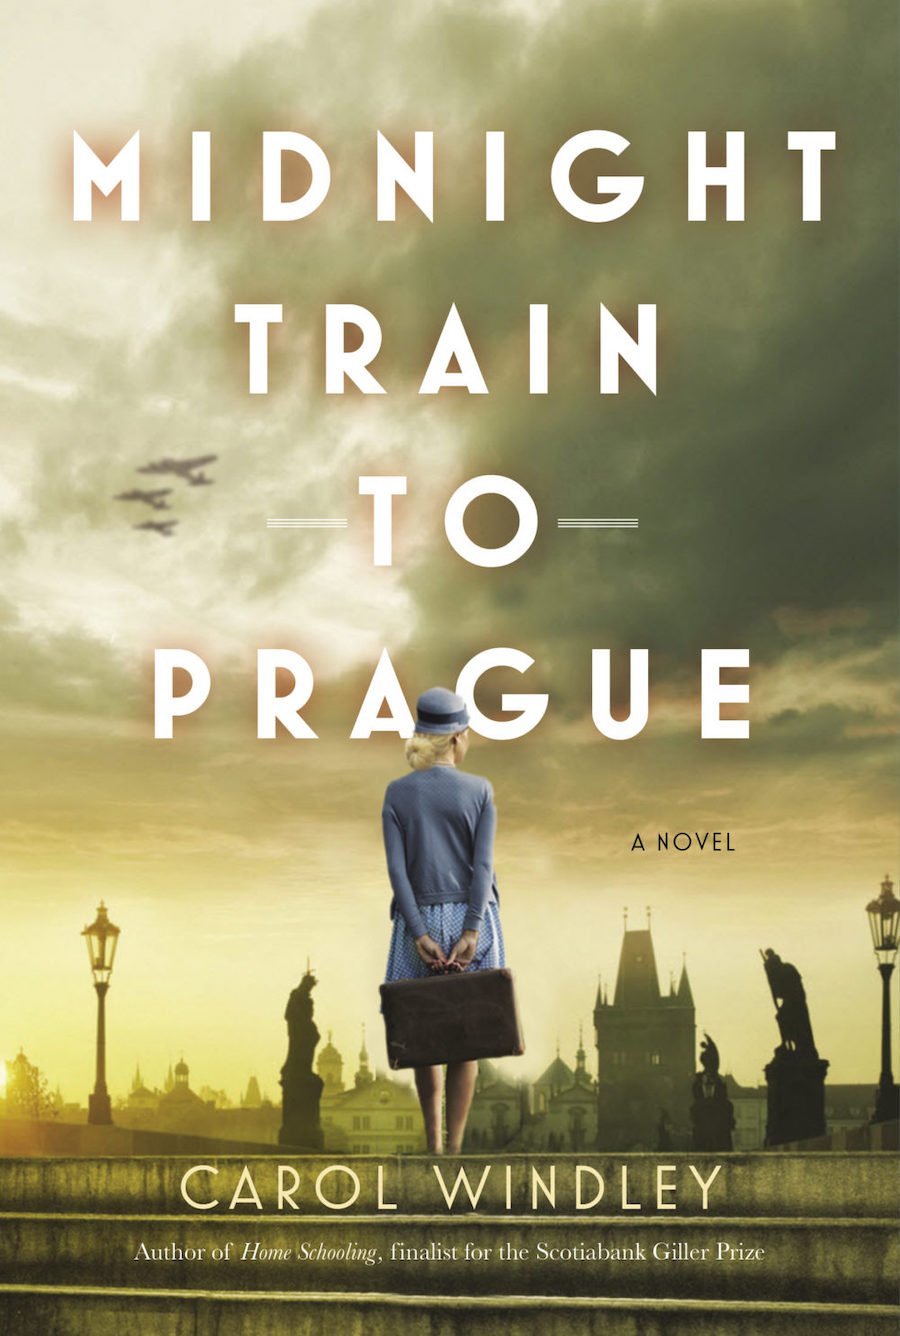 The book cover for The Midnight Train to Prague